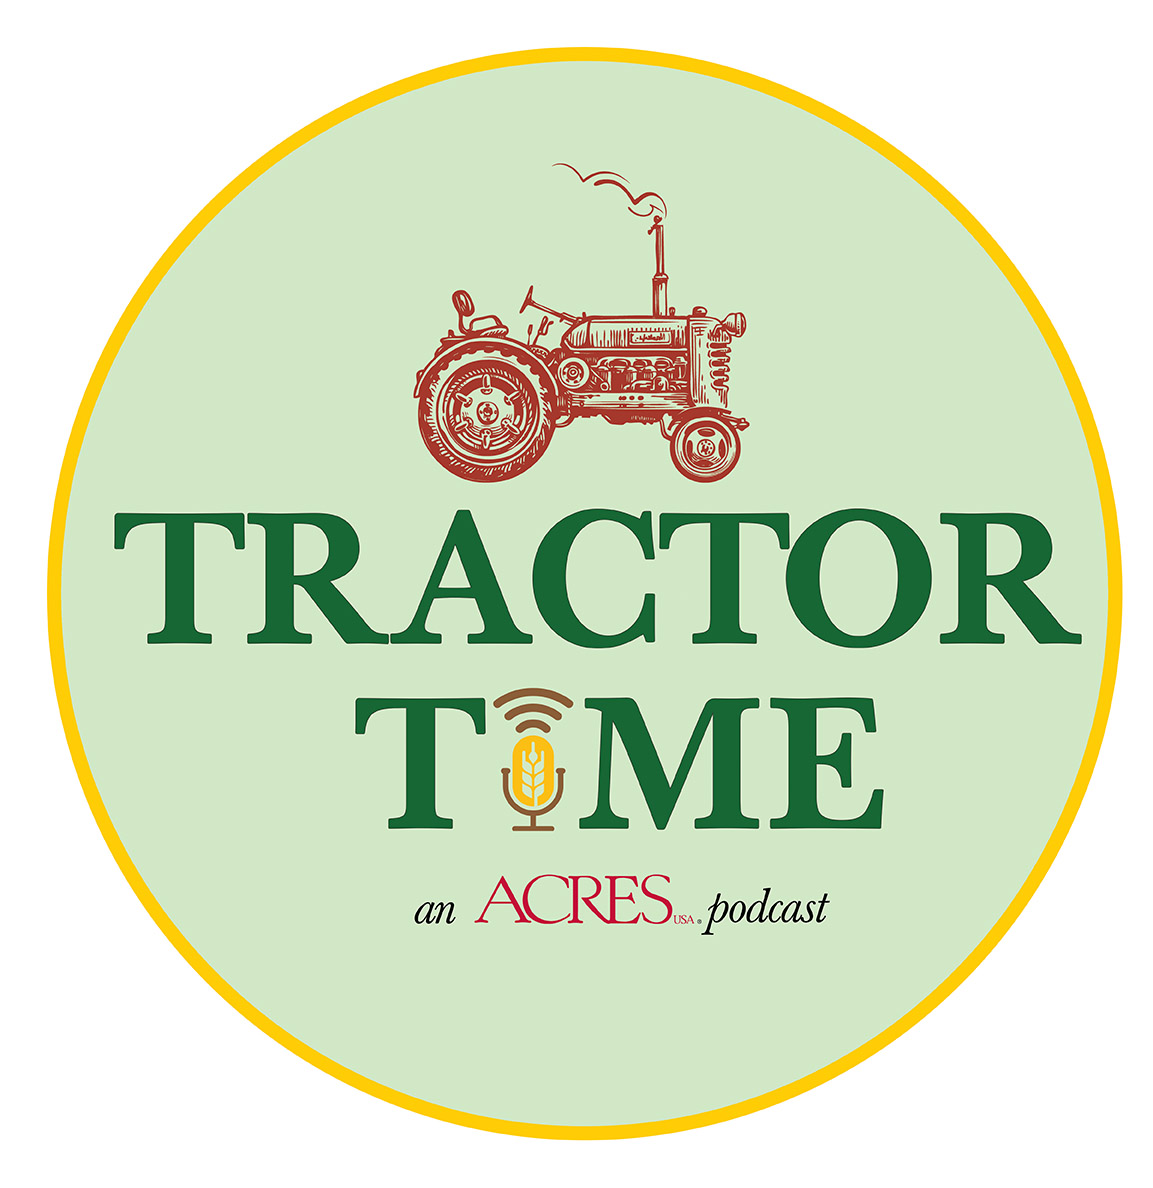 Acres U S A Tractor Time